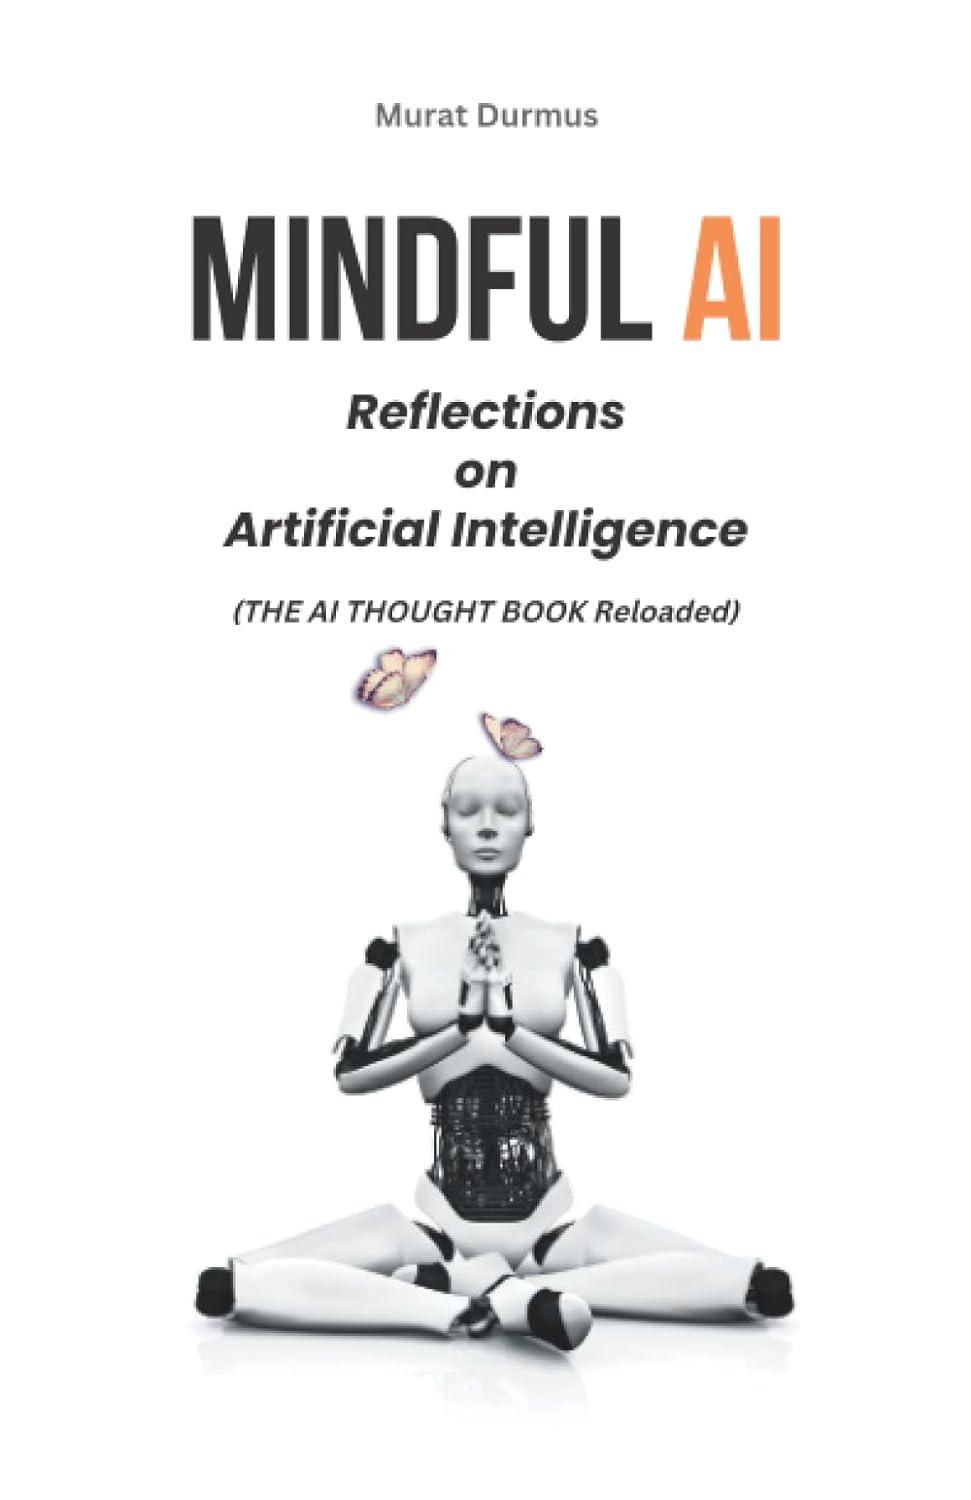 mindful ai  reflections on artificial intelligence 1st edition murat durmus b0bkmk6hlj, 979-8360396796